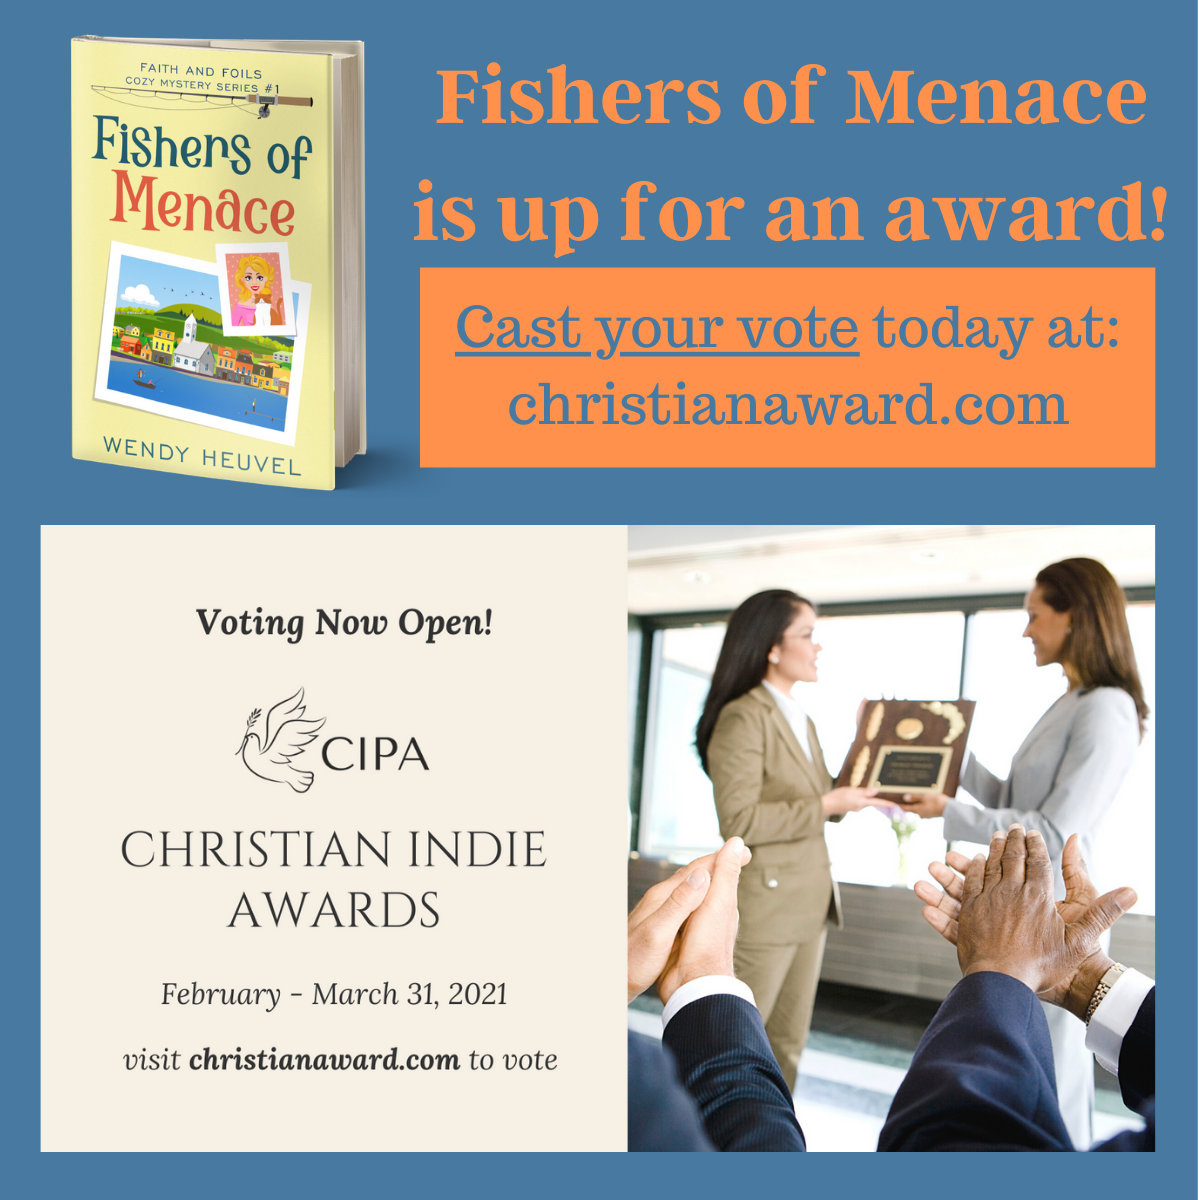 Fishers of Menace Needs Your Votes!